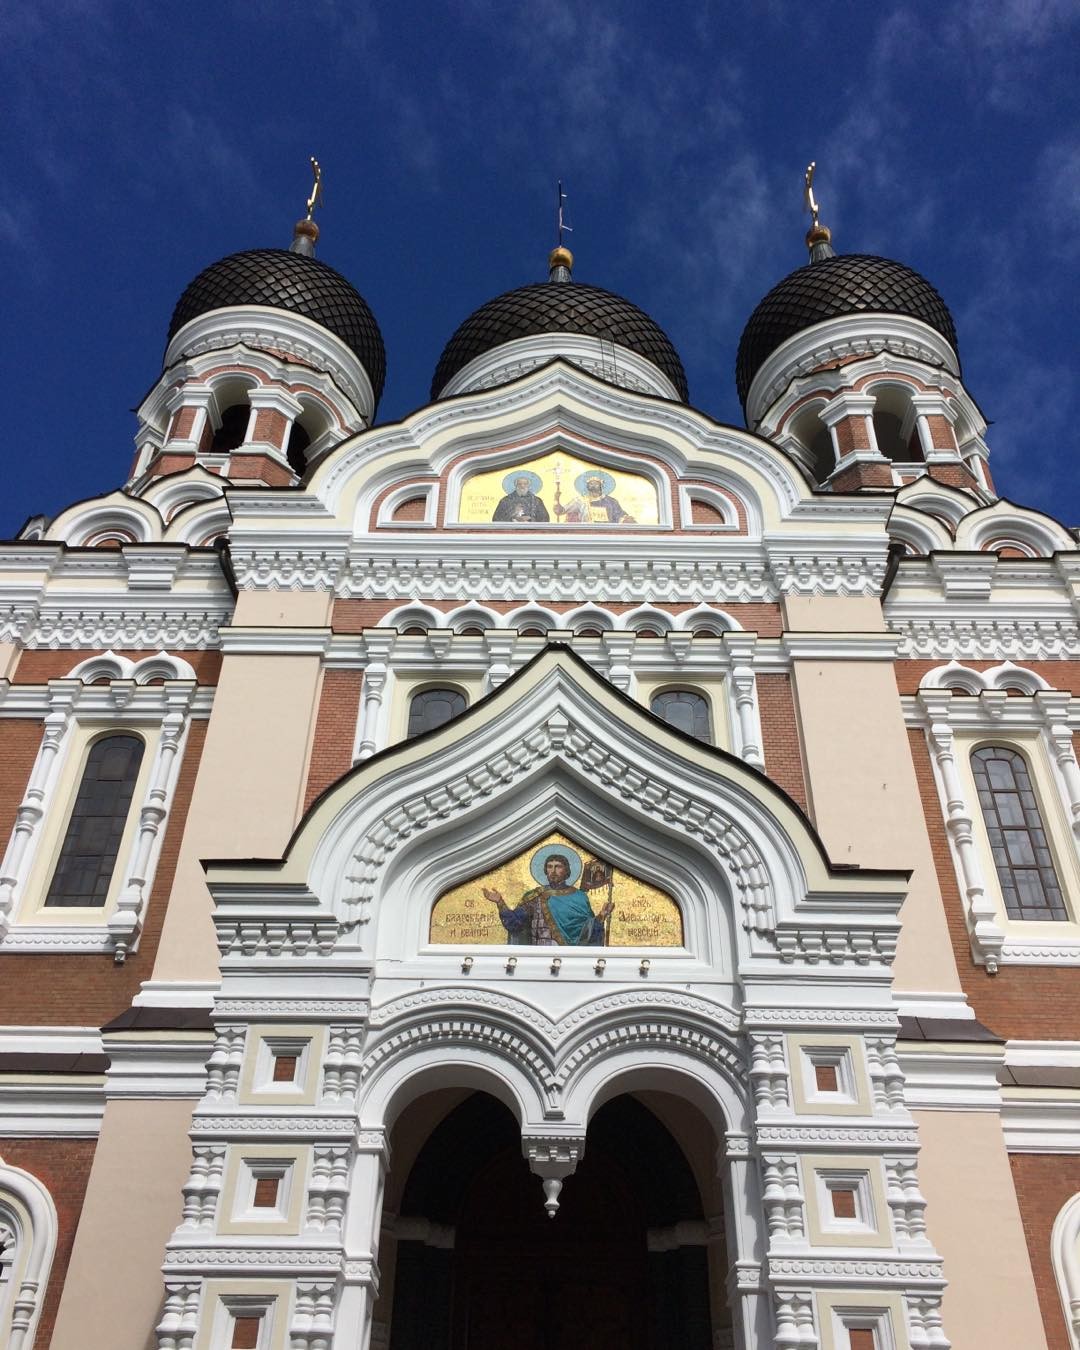 Old Town Tallinn, Estonia 🇪🇪.
.
The Alexander Nevsky Cathedral in the Old Town of Estonias capital. It has been restored after years of neglect during Soviet rule to the remarkable building it is today.
.
#travel #estonia #tallinn #backpack #europe #oldtown #alexandernevskycathedral #cathedral #summer #daytrip